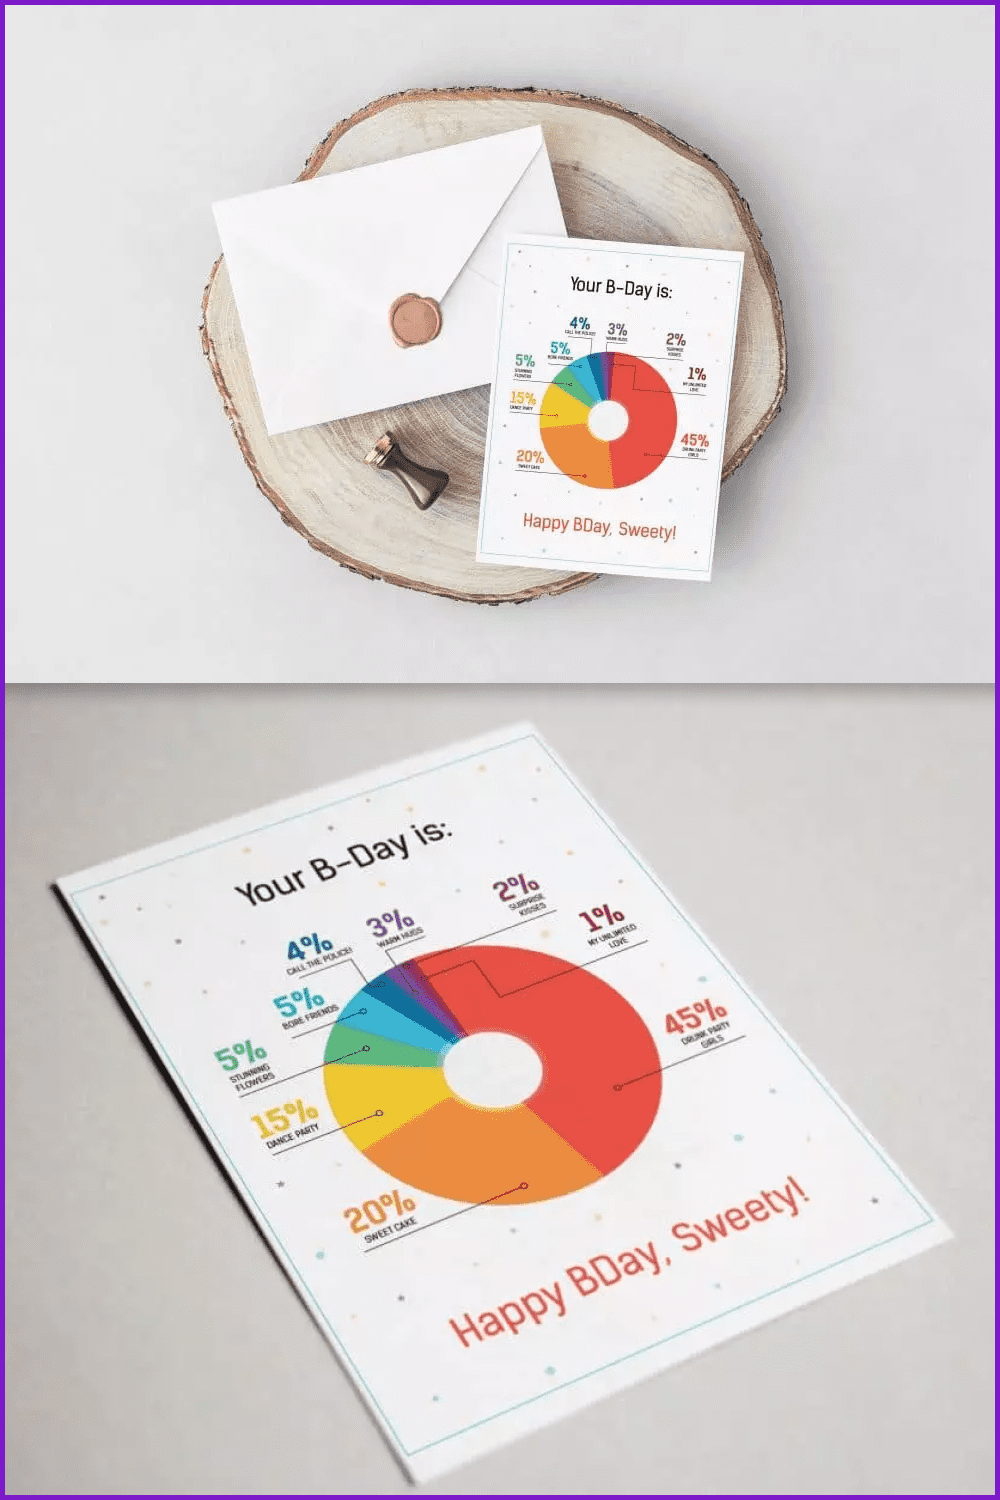 White postcard with round colorful chart.